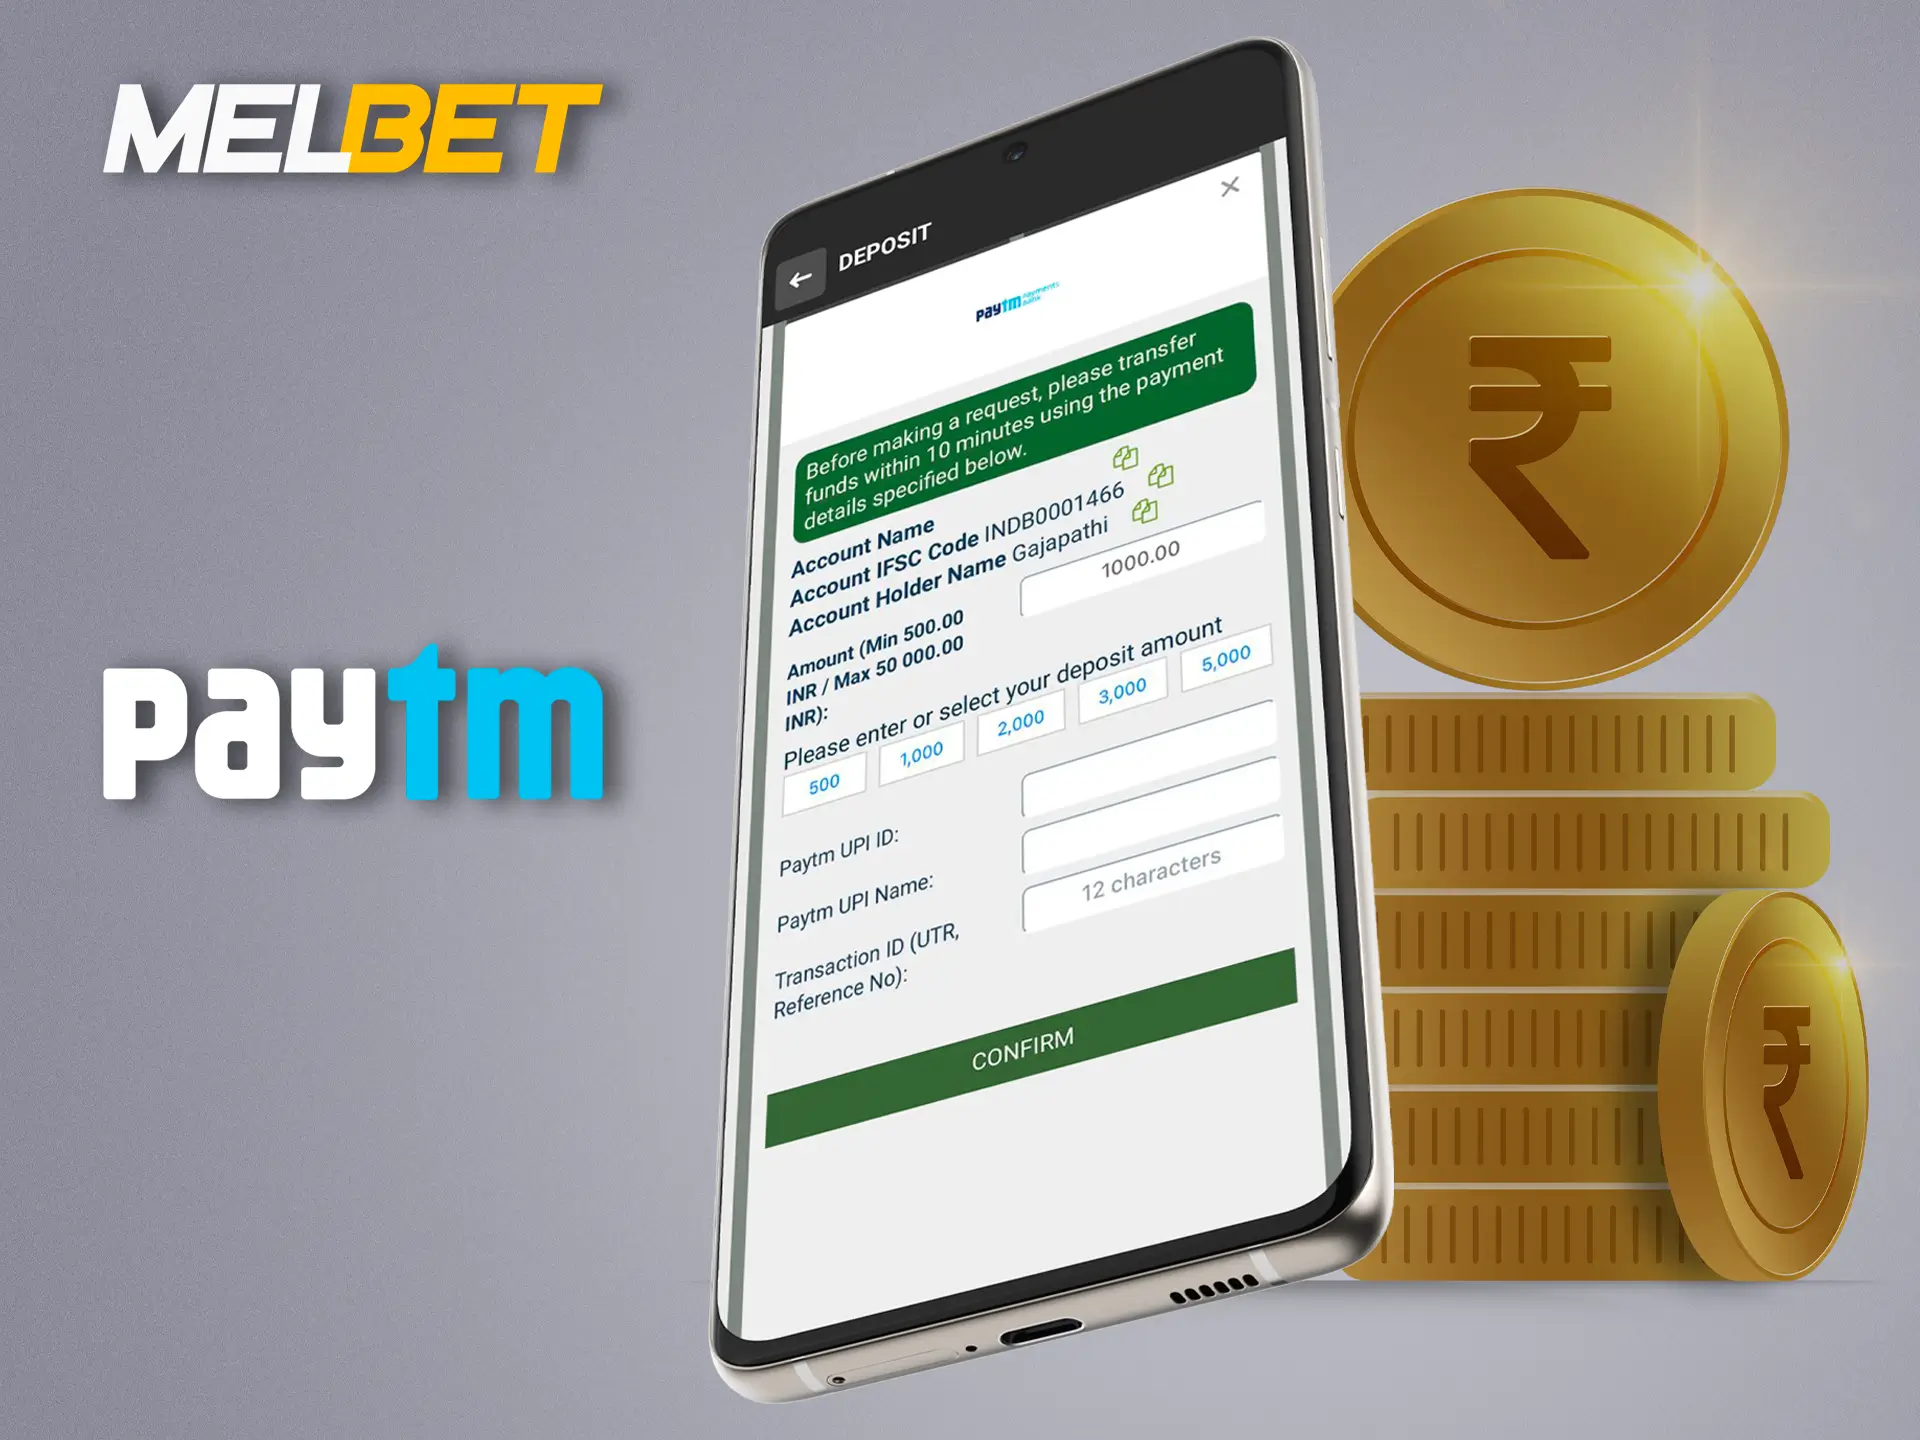 Melbet is a well-known casino with a high level of security and the most famous and accessible PayTm withdrawal system.